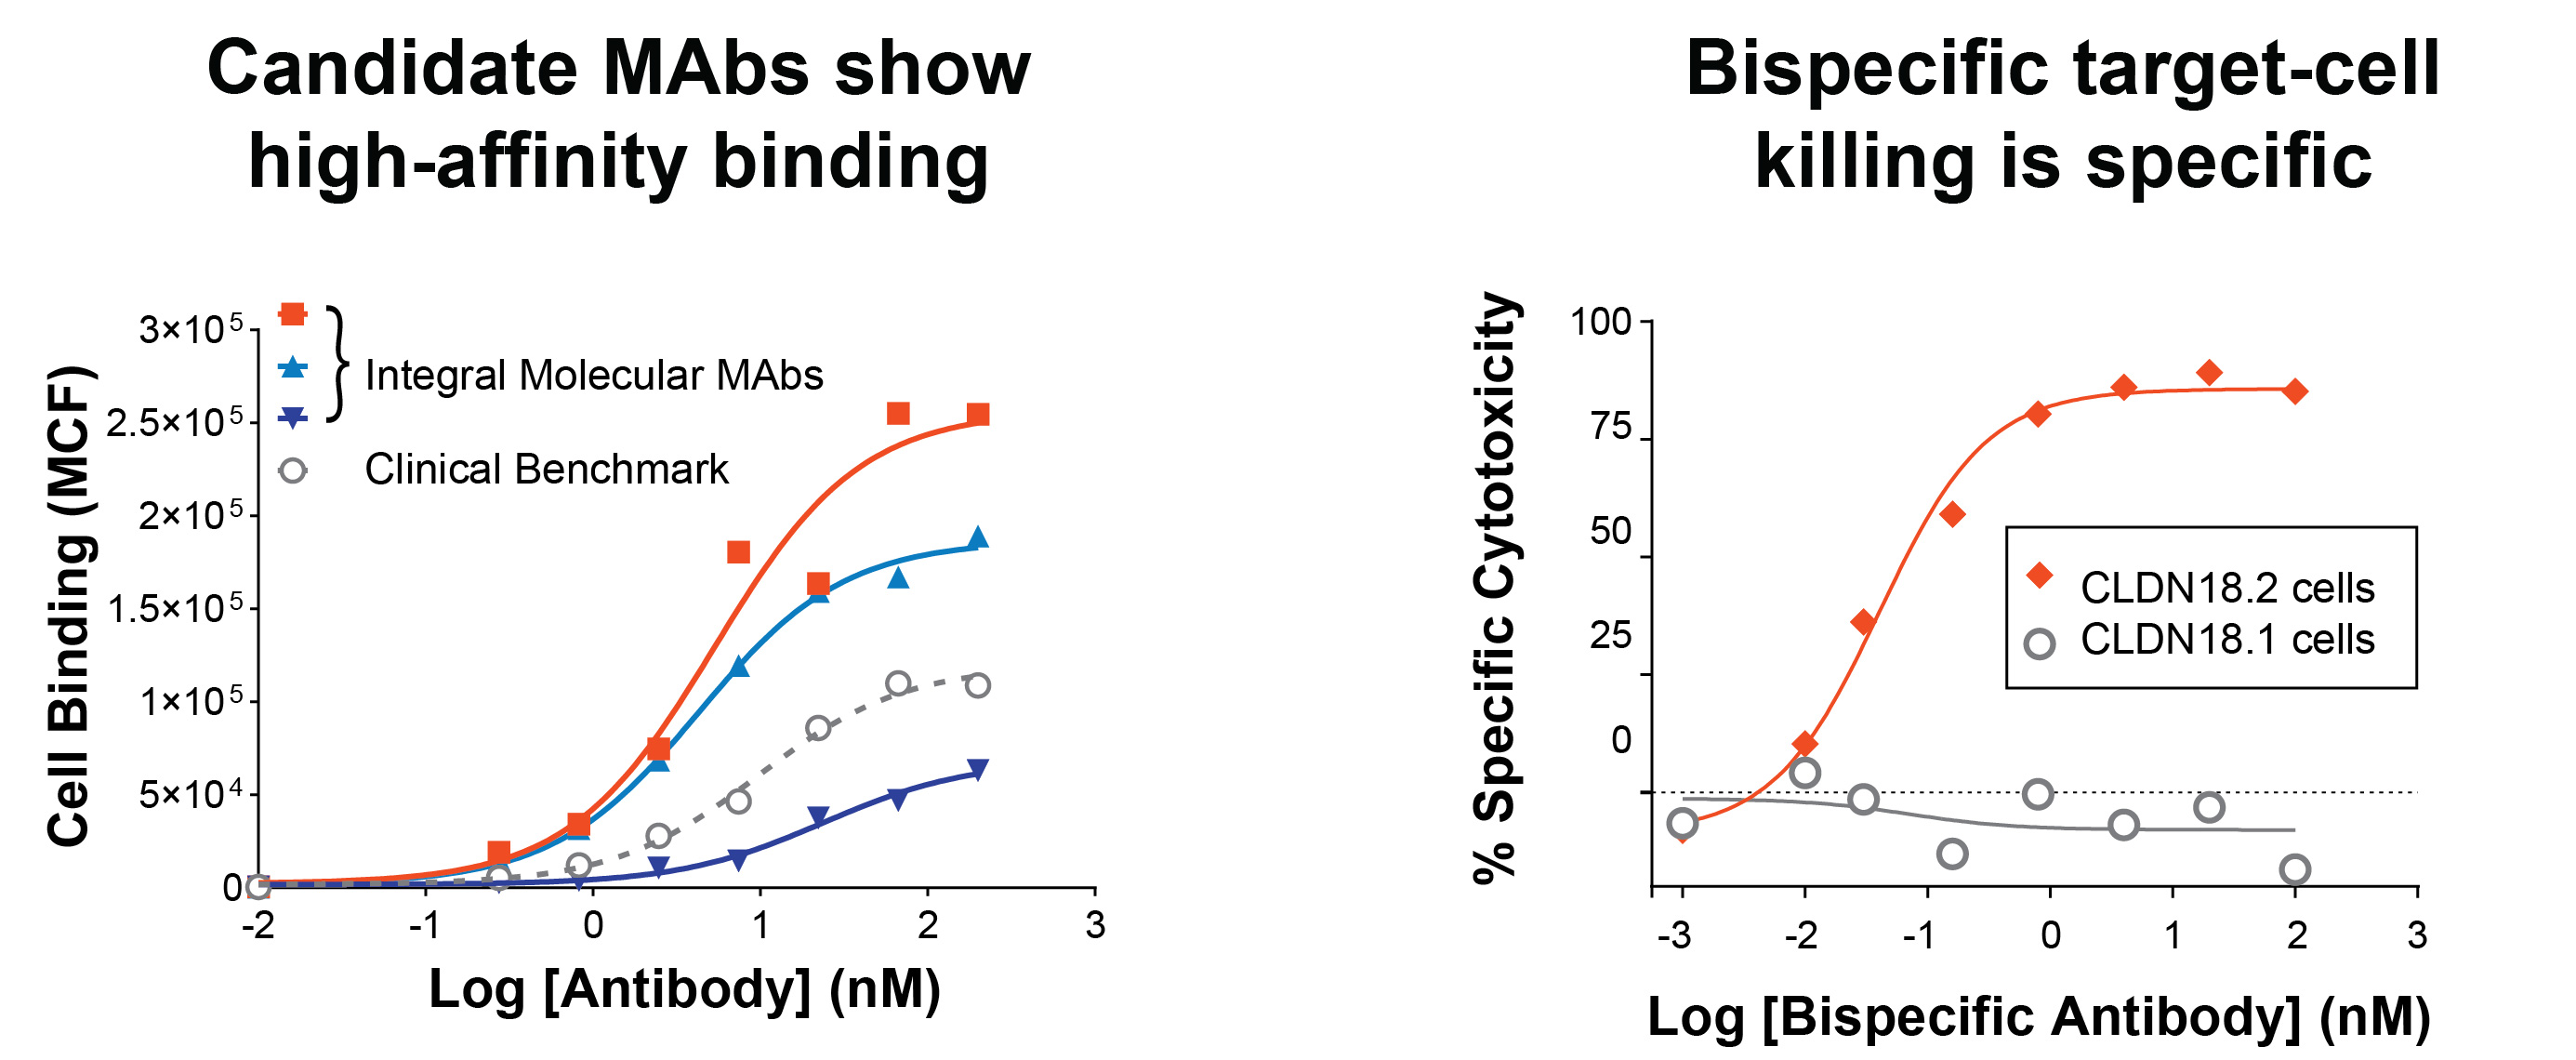 Left graph titled “Candidate MAbs show high-affinity binding” plots antibody concentration against cell binding. It compares three Integral Molecular MAbs to a clinical benchmark. Right graph titled “Bispecific target-cell killing is specific to CLDN18.2” plots bispecific antibody concentration against percent specific cytotoxicity. It compares bispecific cytotoxicity against CLDN18.2 and CLDN18.1 cells.